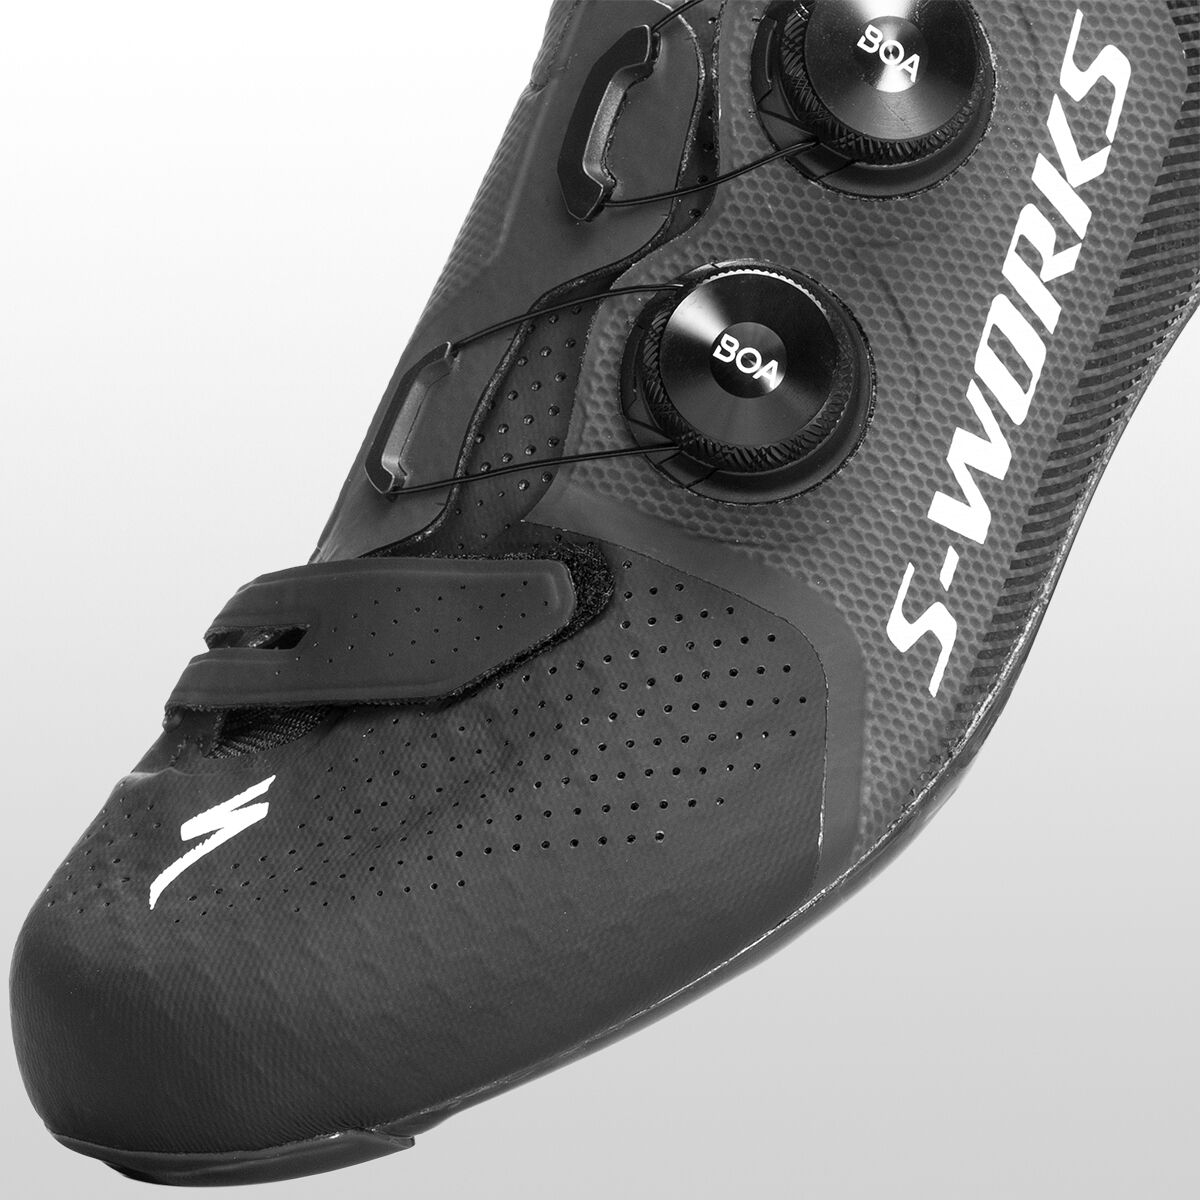 Specialized S-Works 7 Cycling Shoe - Men